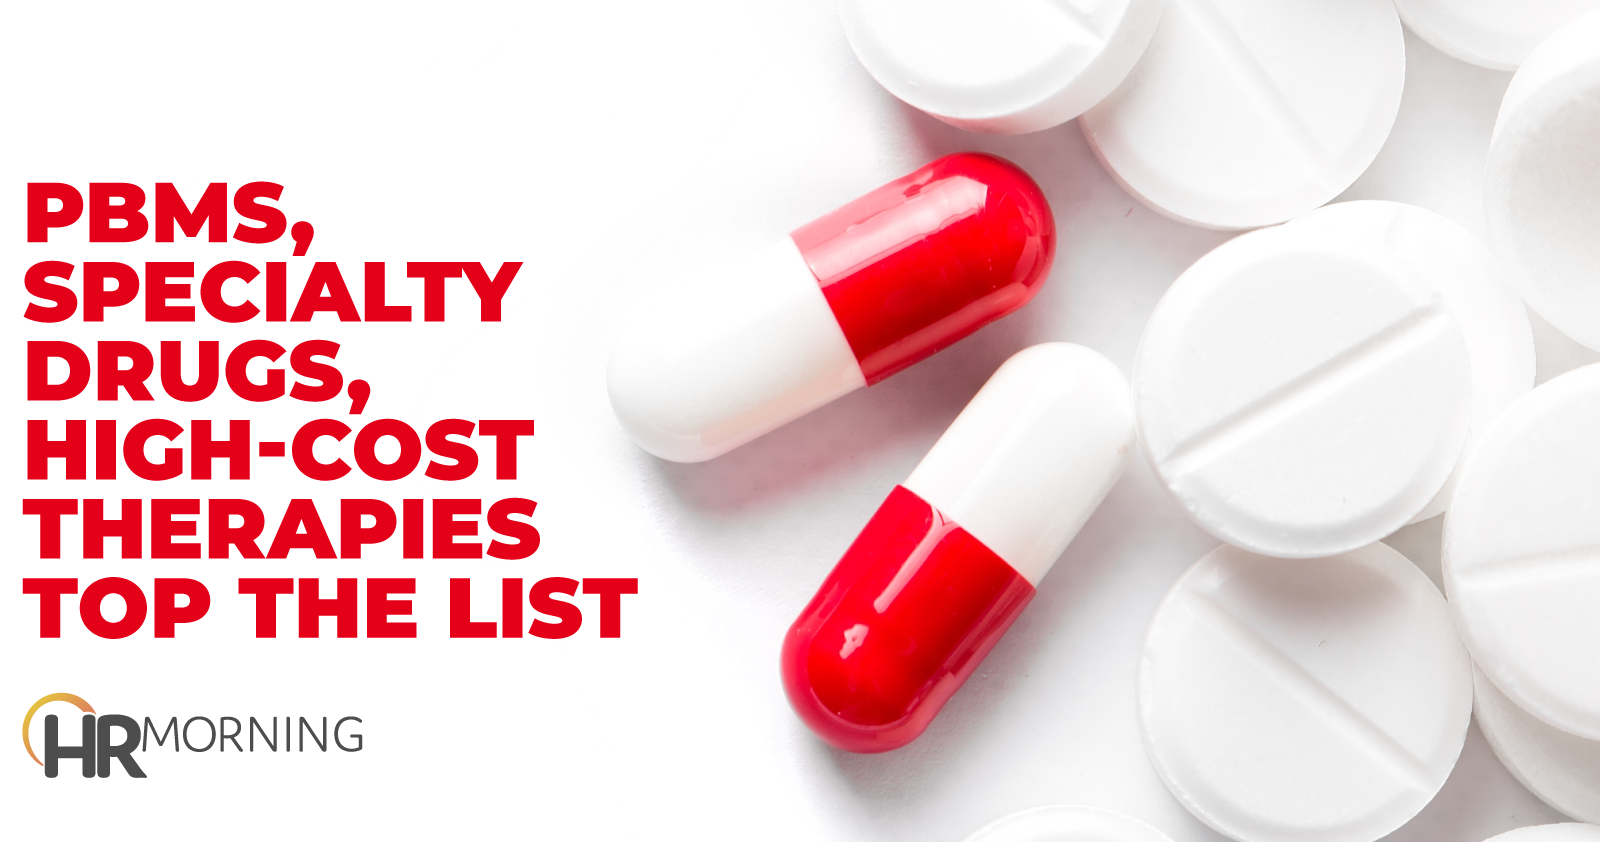 PBMs Specialty Drugs High-Cost Therapies Top The List